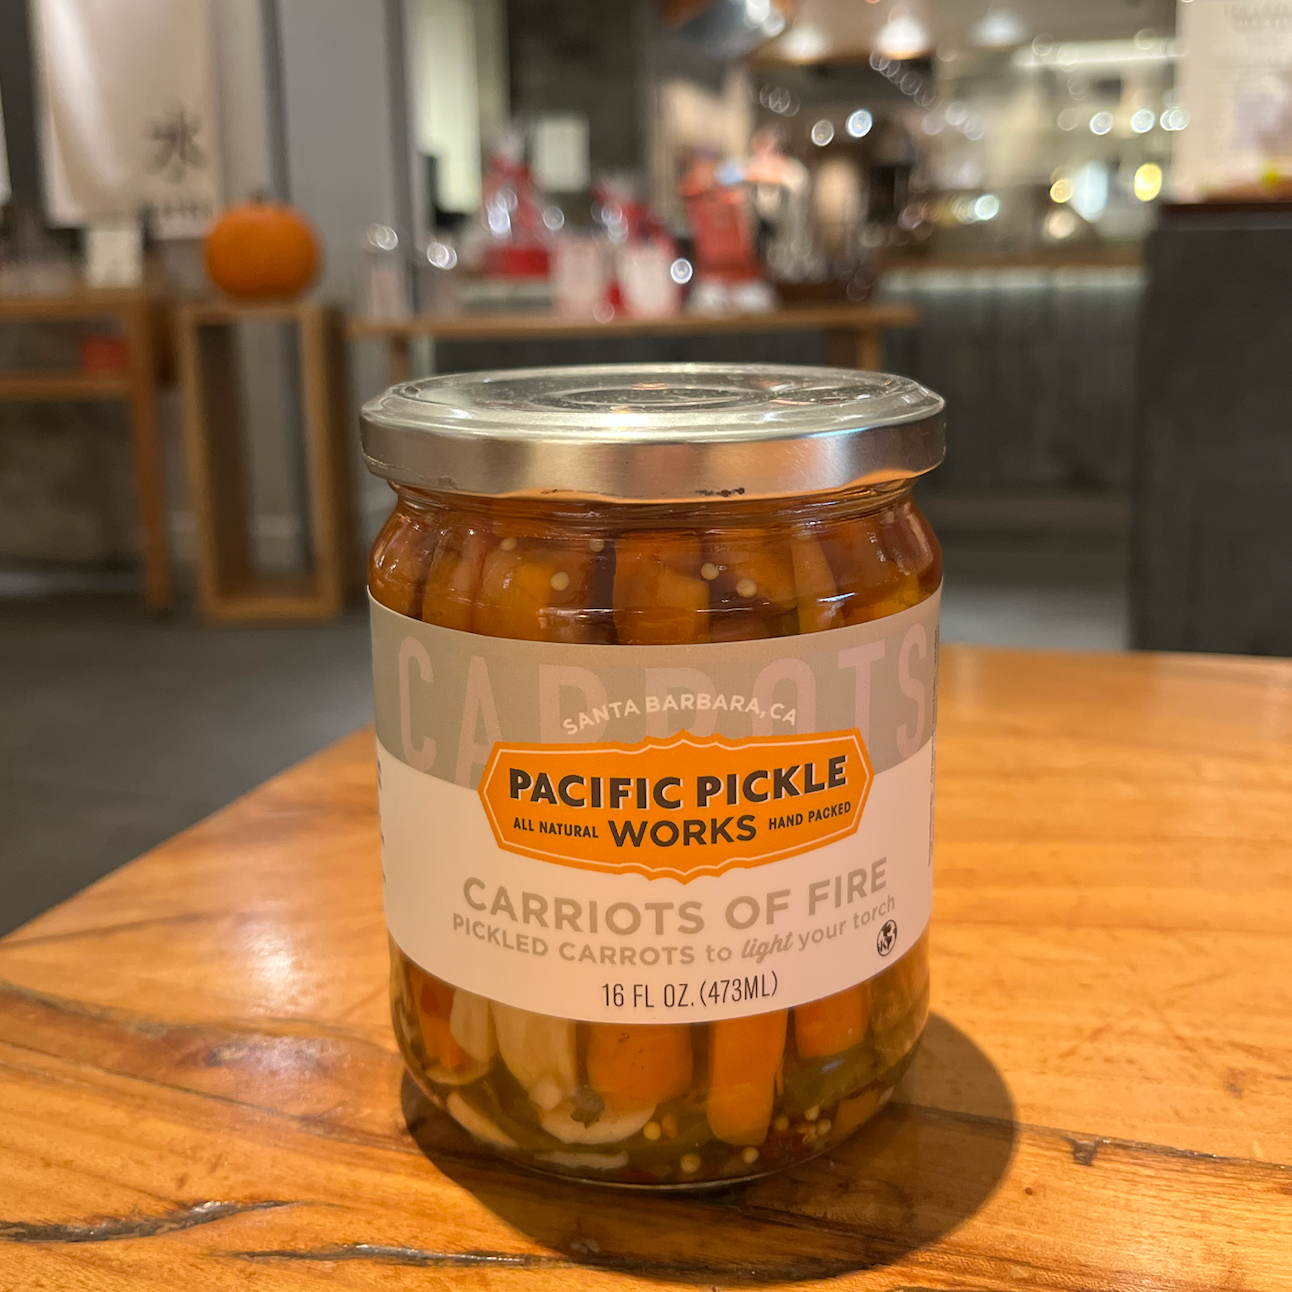 The Original West Coast Pickle: Pacific Pickle Works "Carriots of Fire"